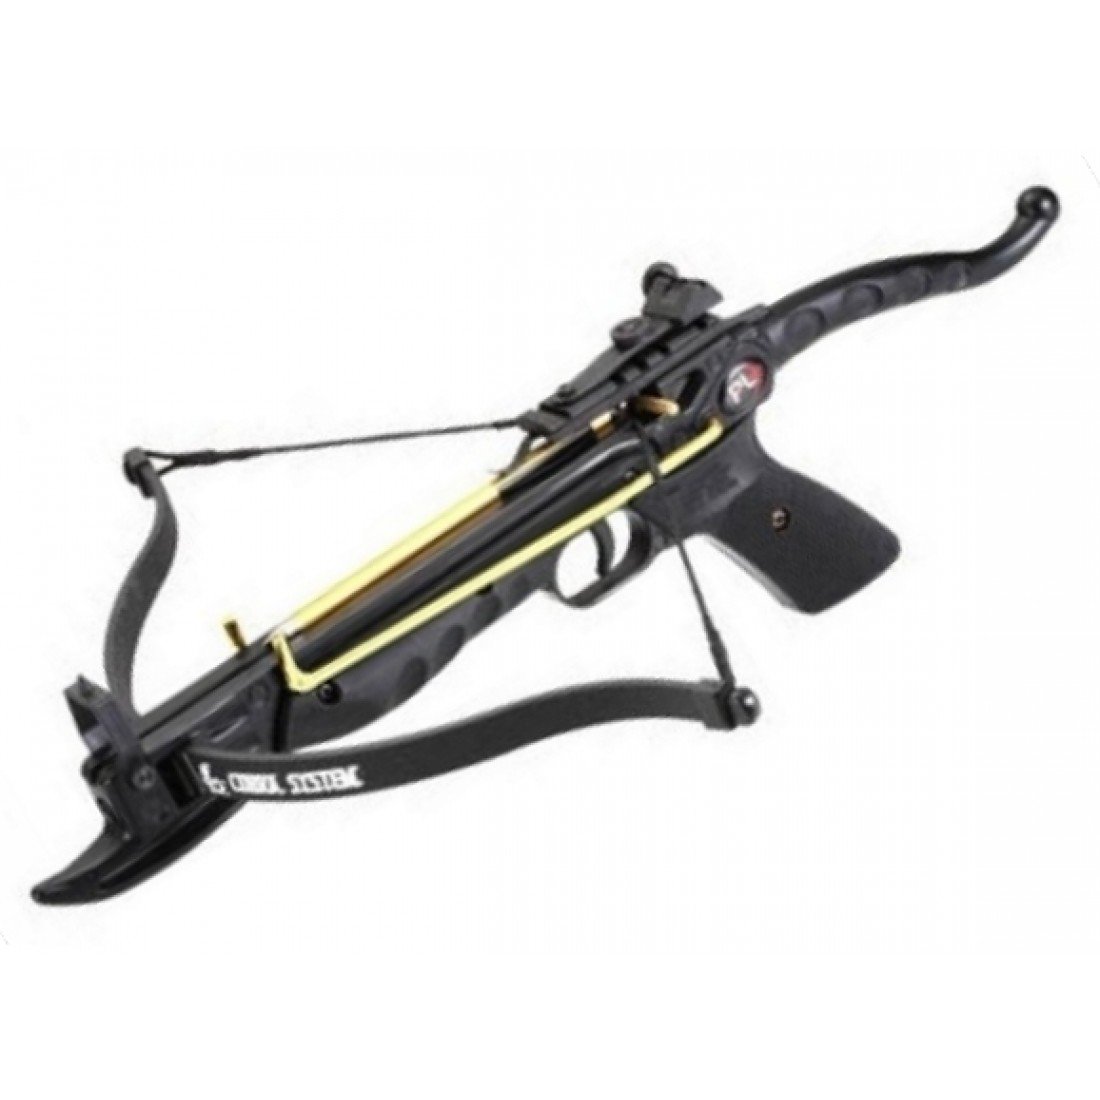 eagle pistol crossbow with safety lock